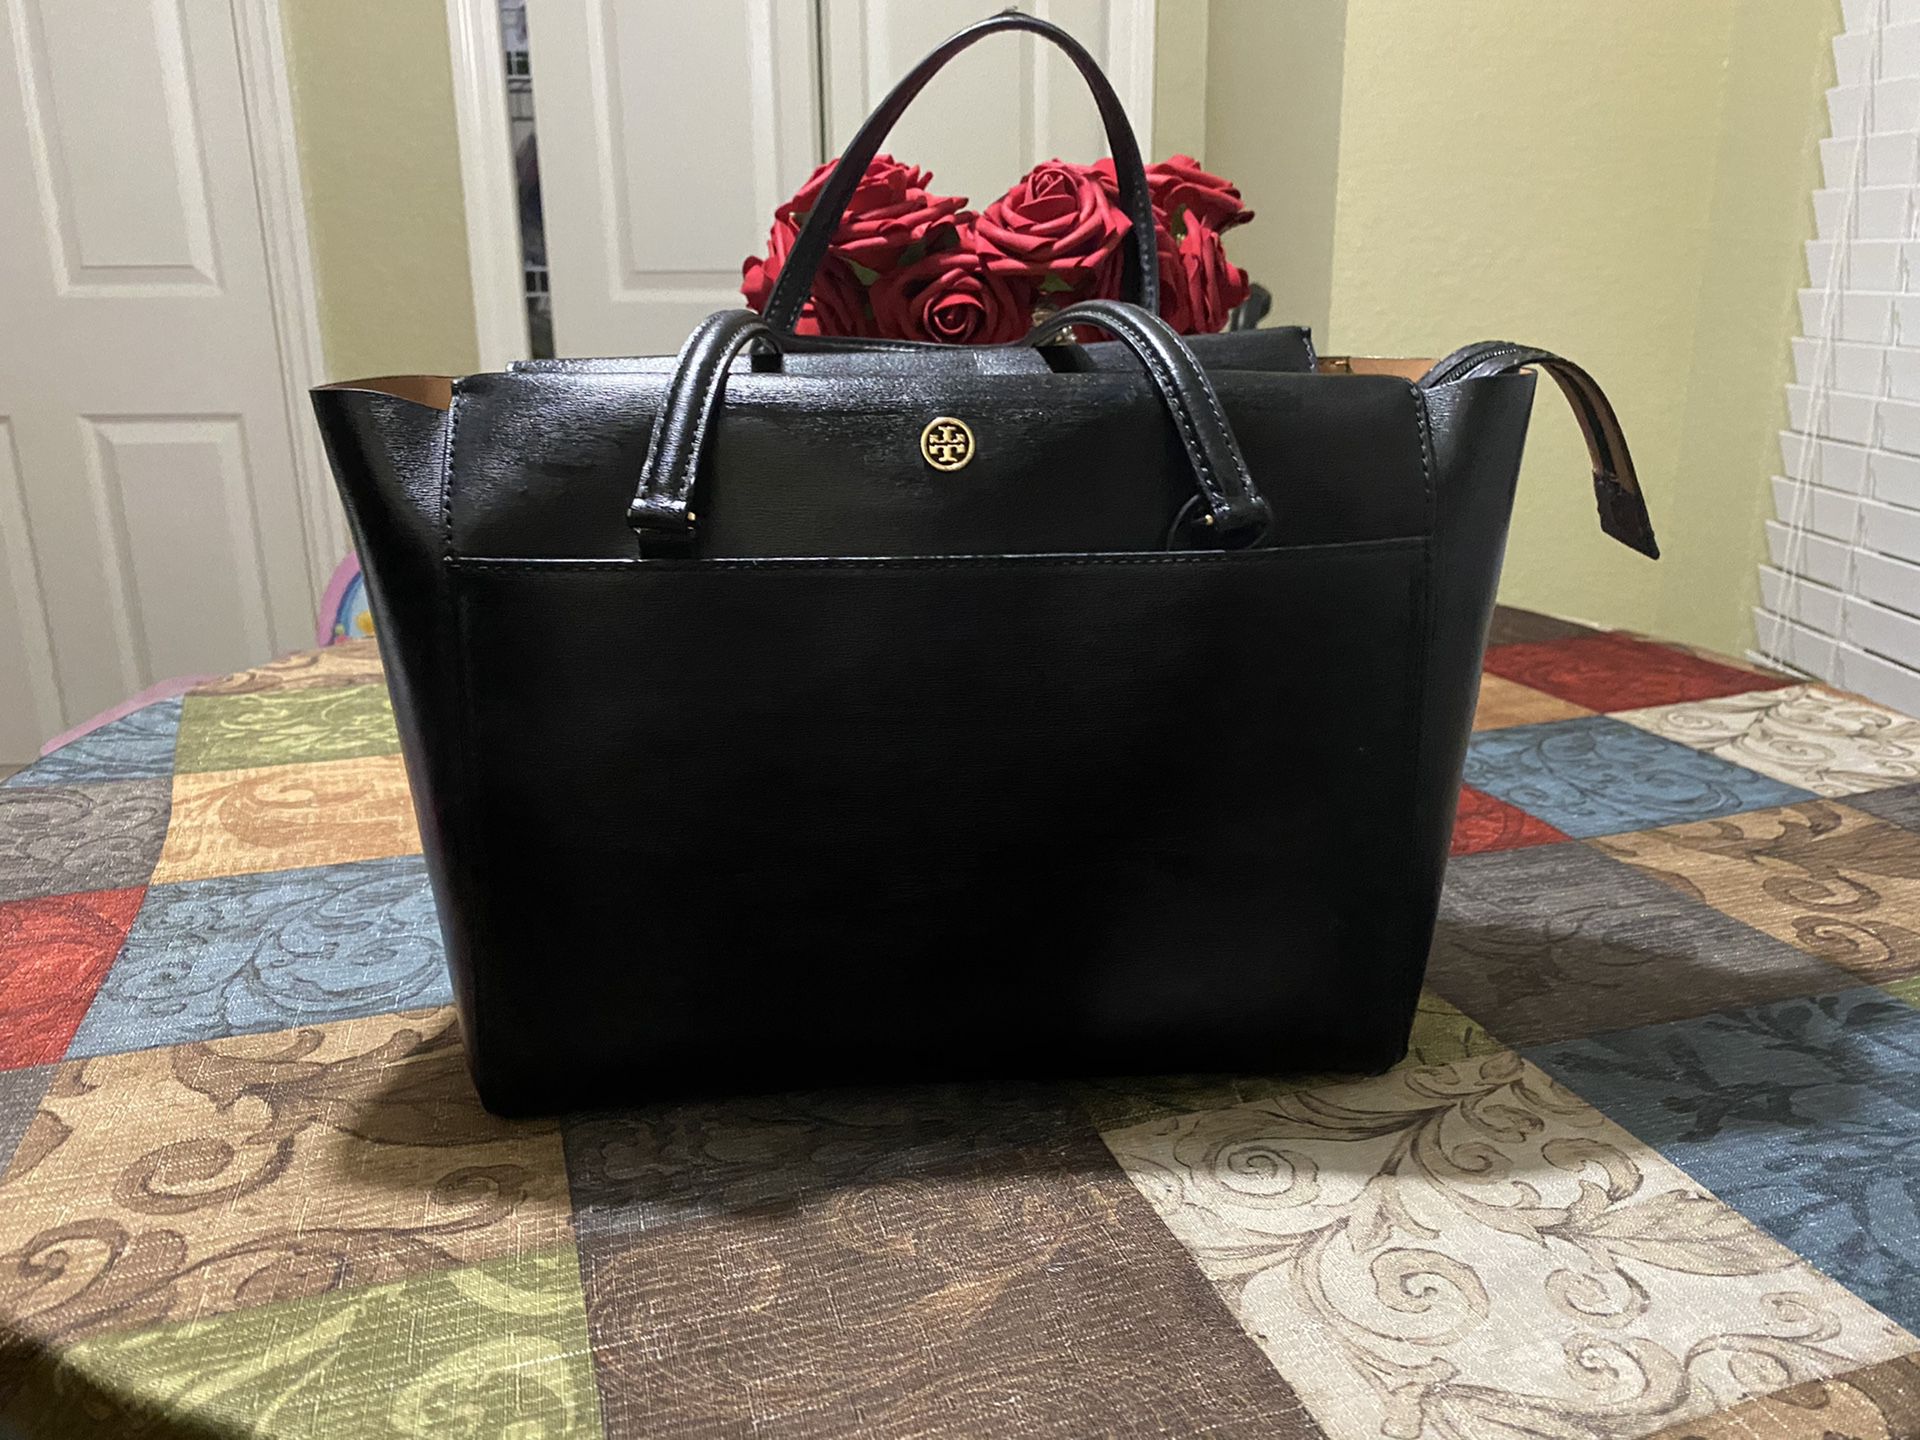 Authentic Tory Burch purse. Good condition